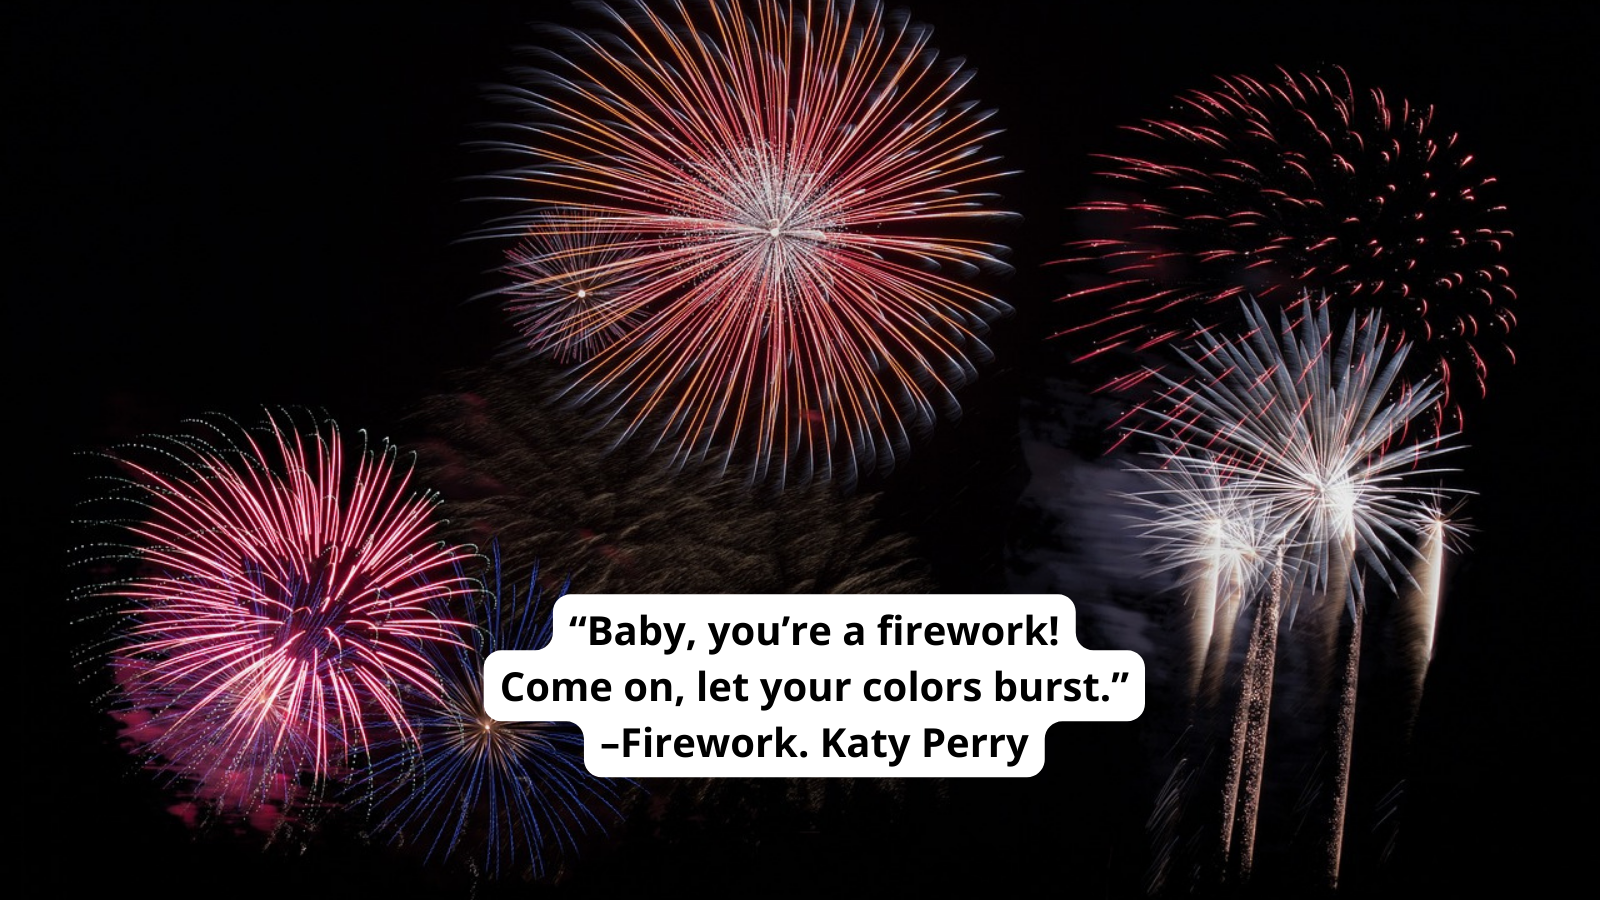 “Baby, you’re a firework! Come on, let your colors burst.” –Firework. Katy Perry